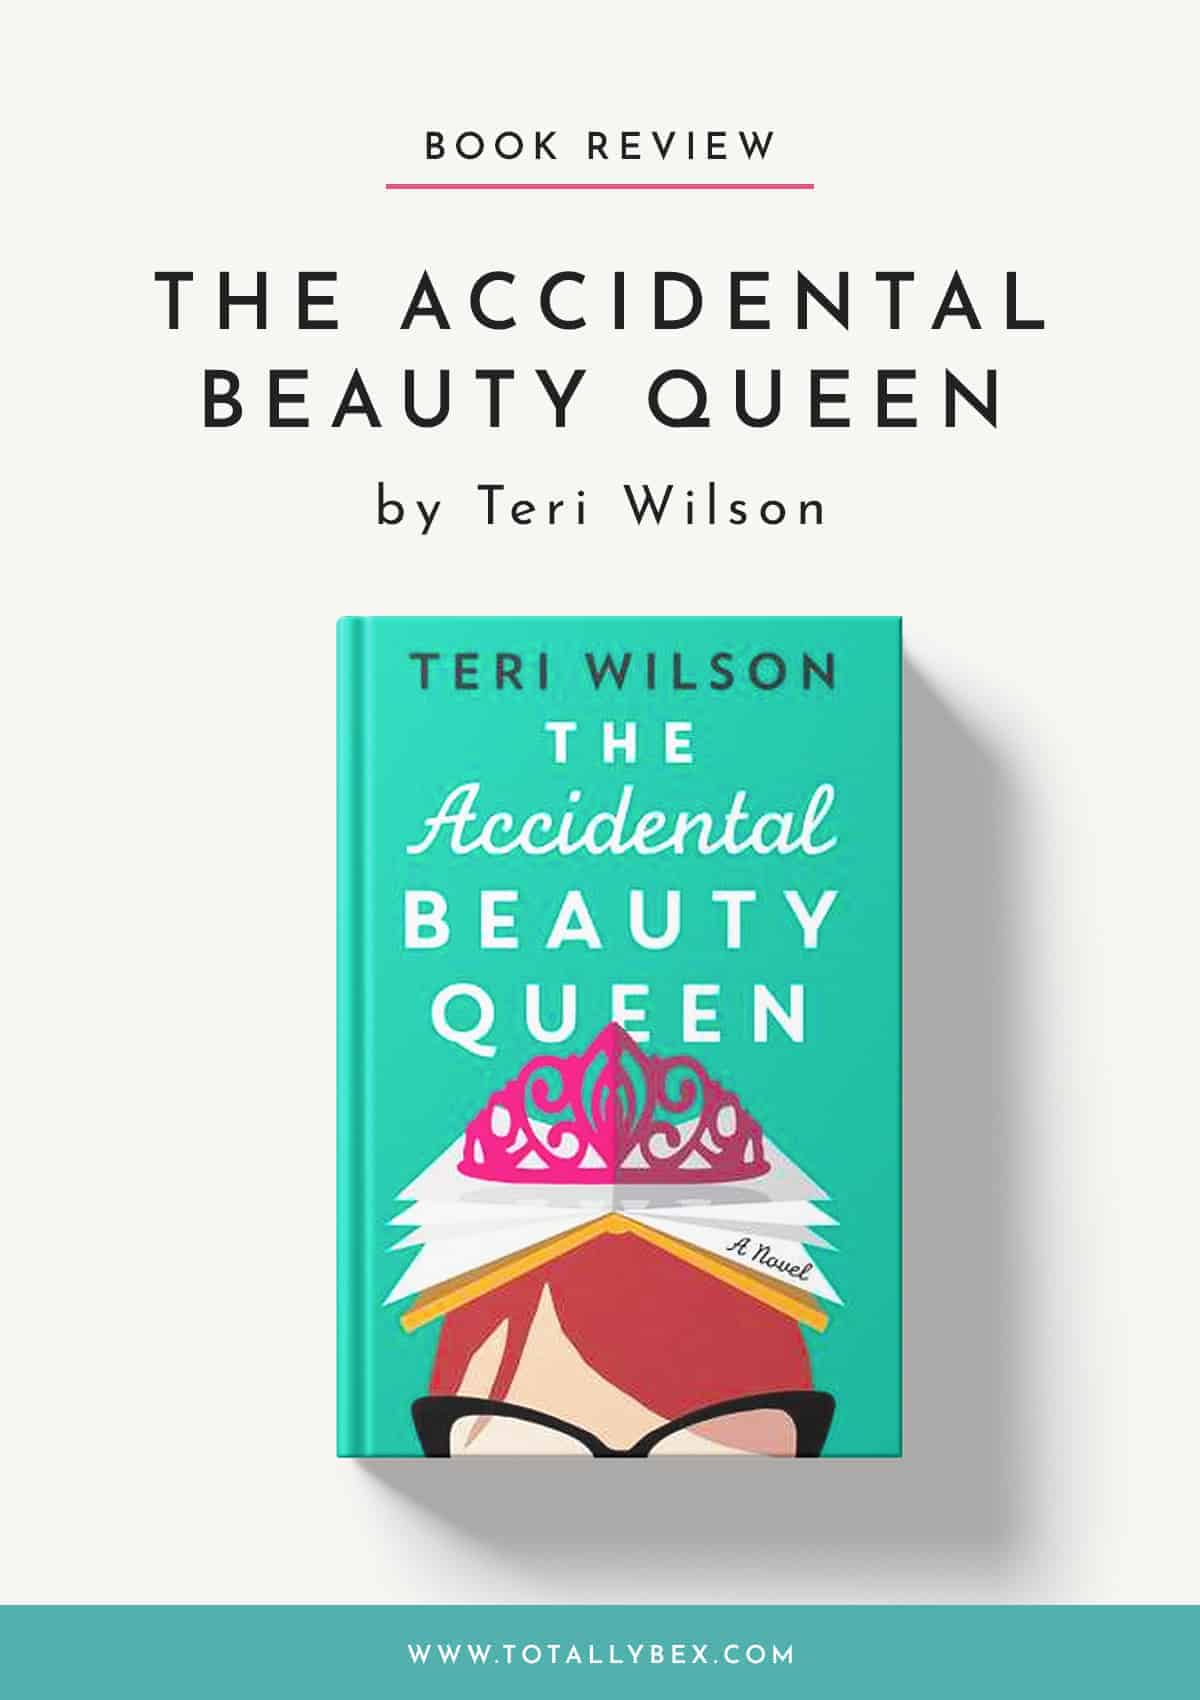 The Accidental Beauty Queen by Teri Wilson-Book Review